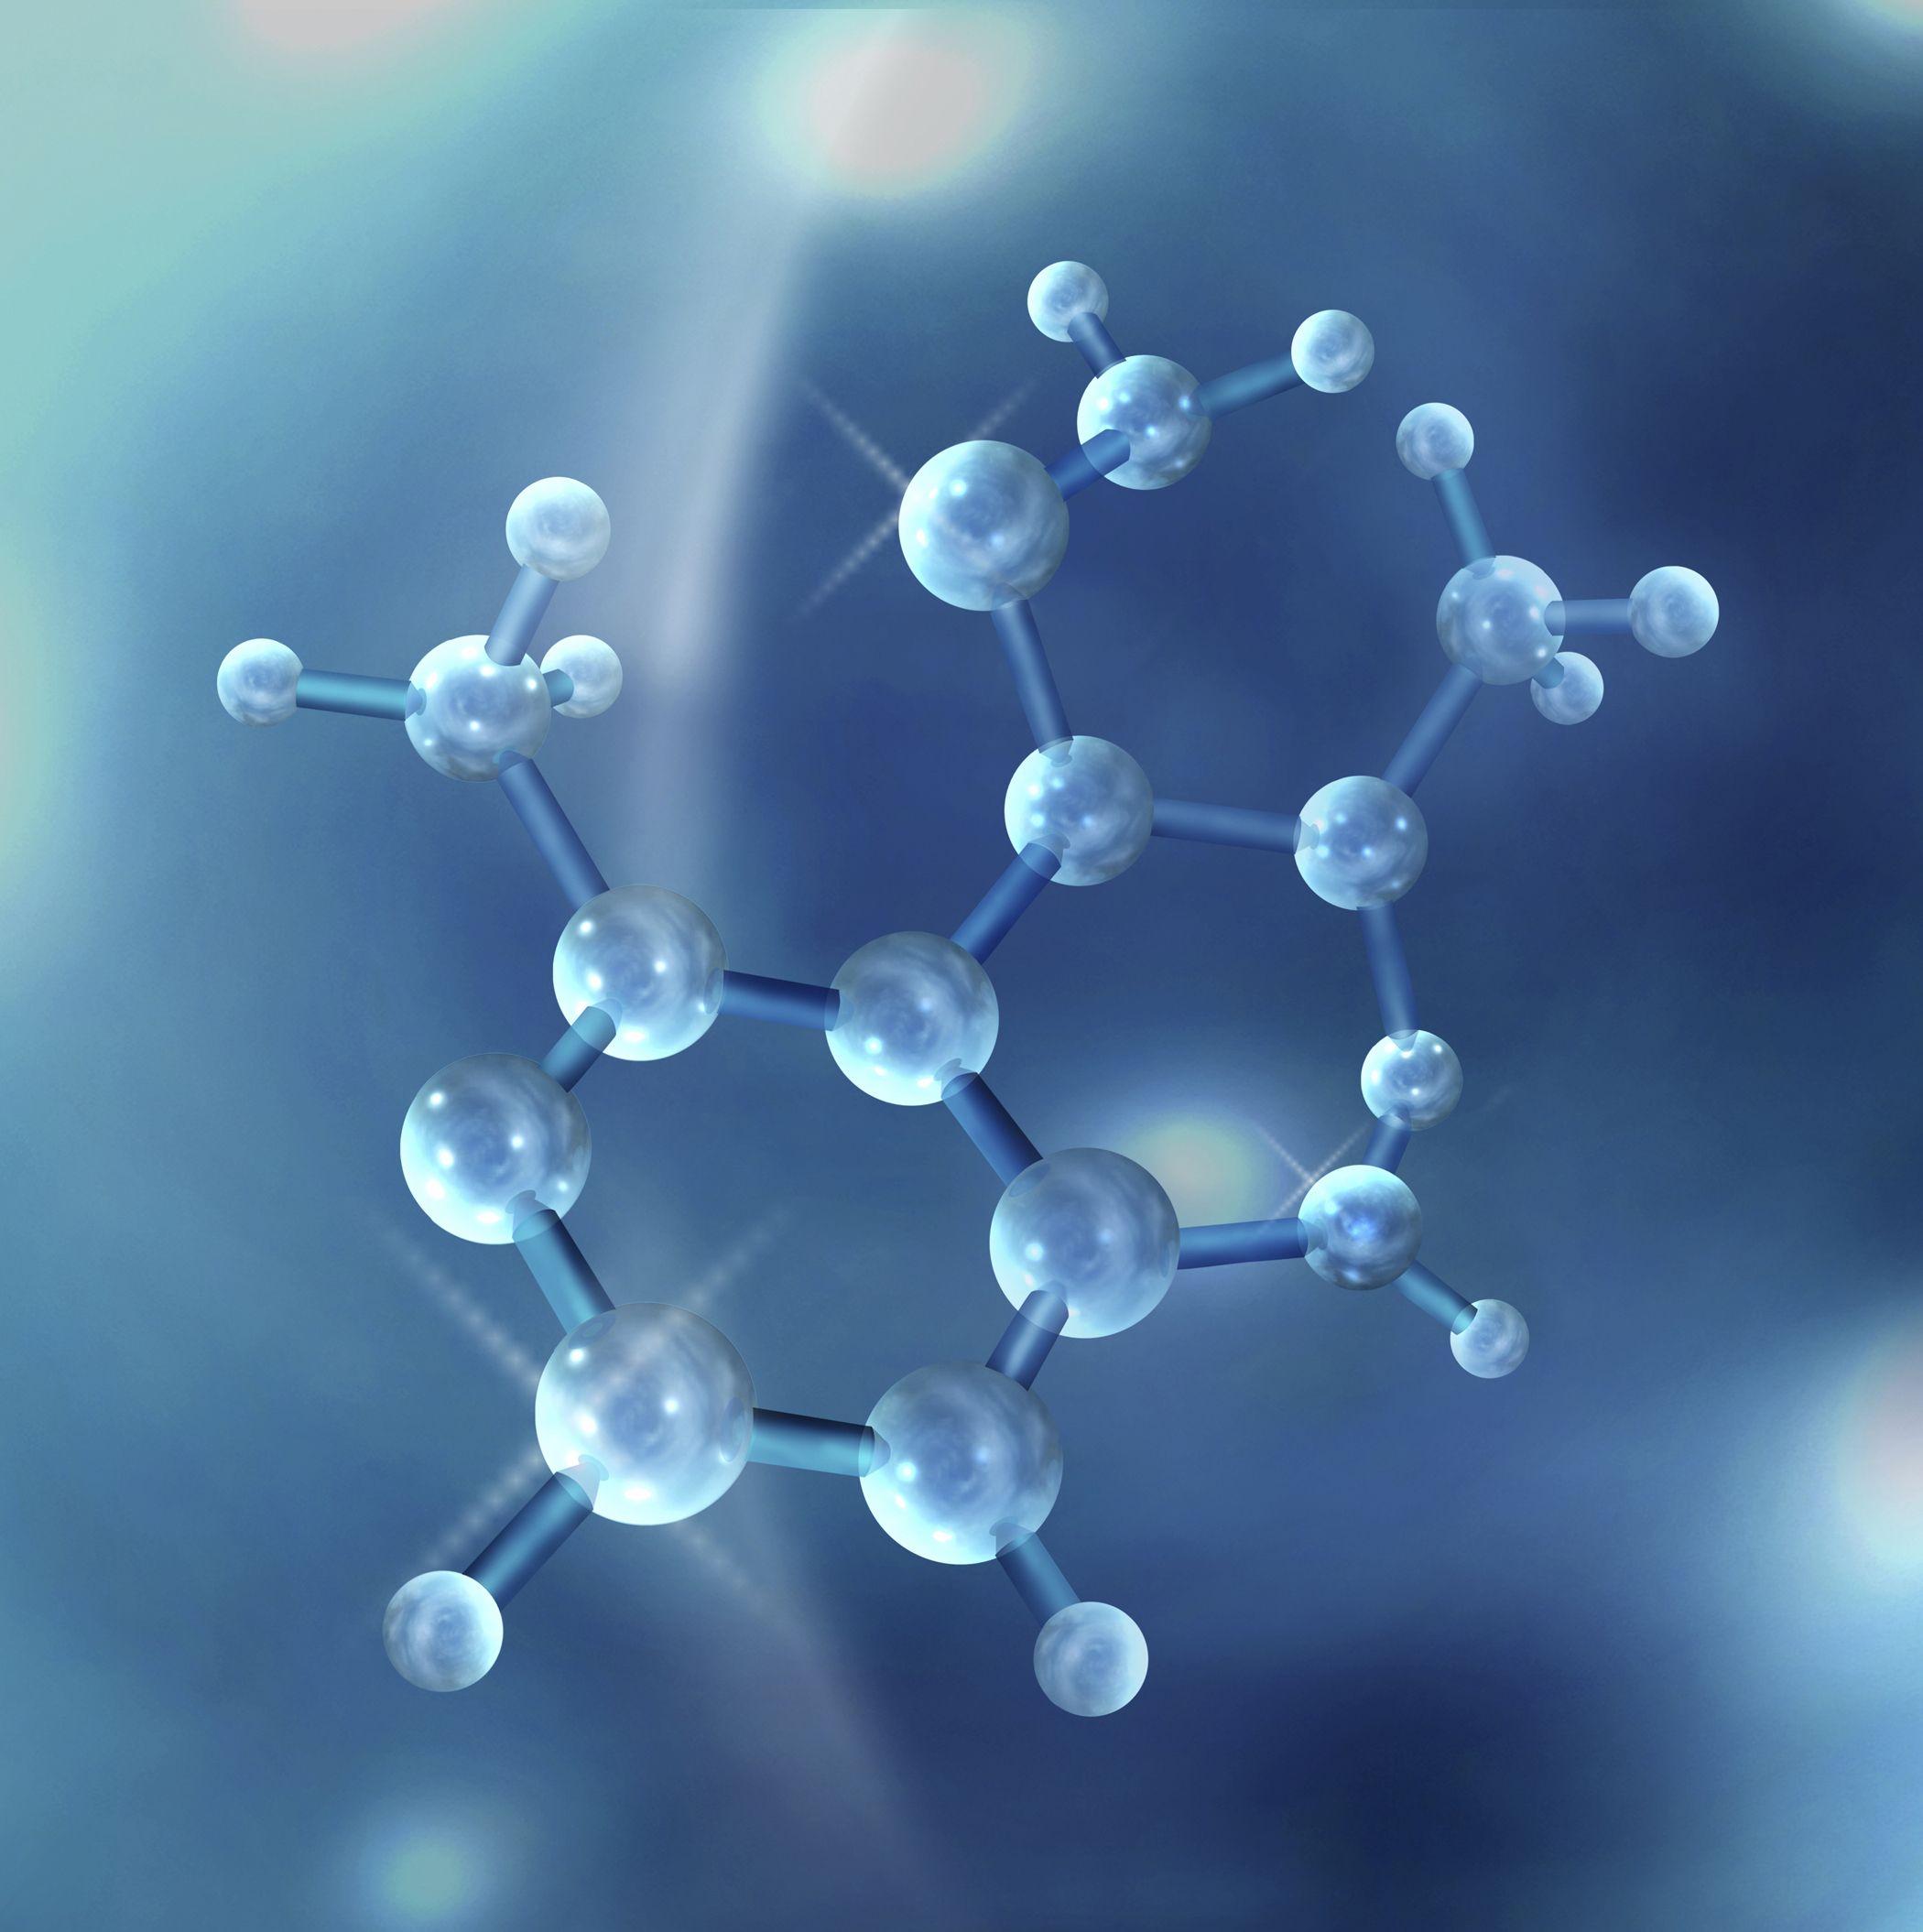 High Quality Molecule Wallpaper. Full HD Picture